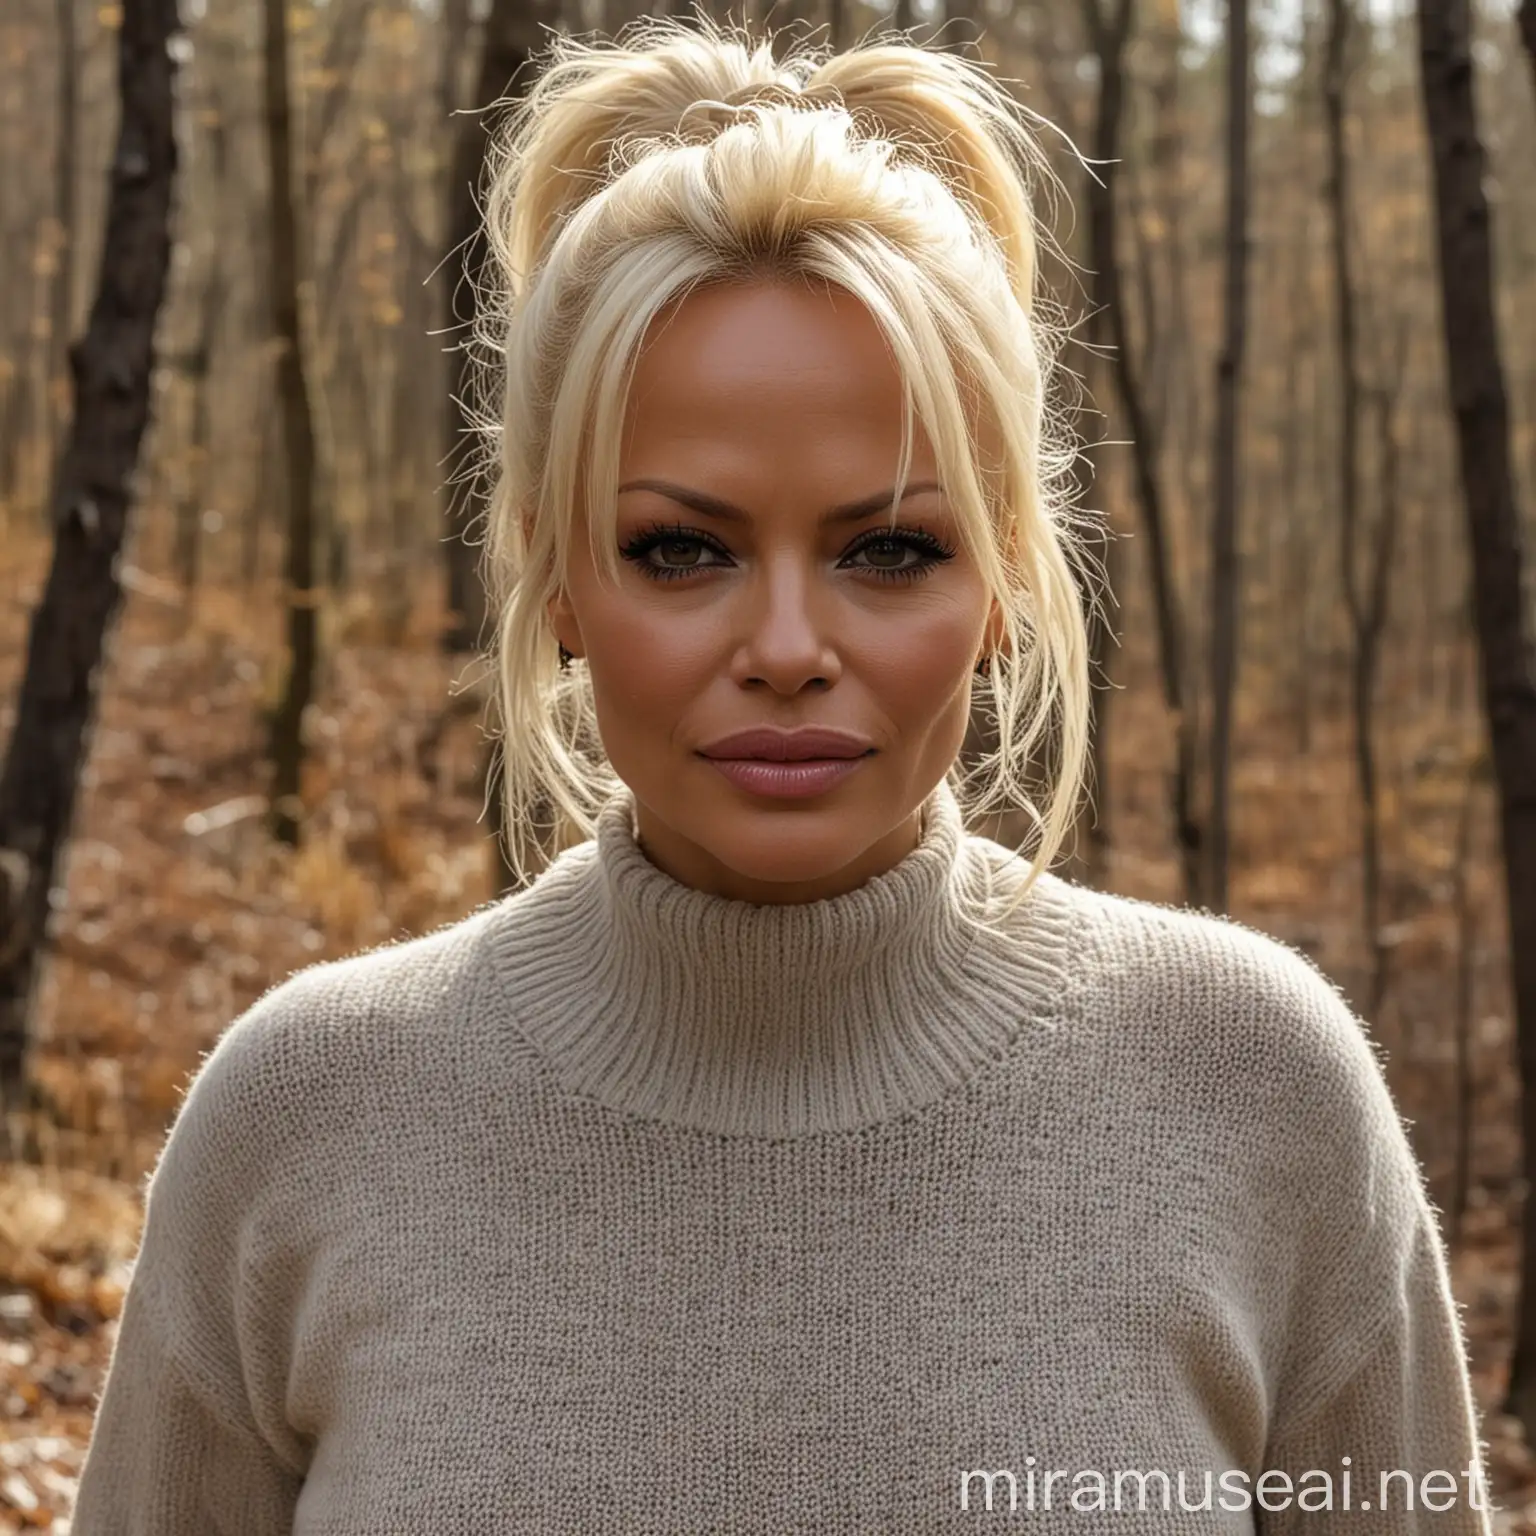 Pamela Anderson hiking in the woods, wearing a sweater, heavy dark mascara, hair in a high ponytail, zoomed in from the waist up